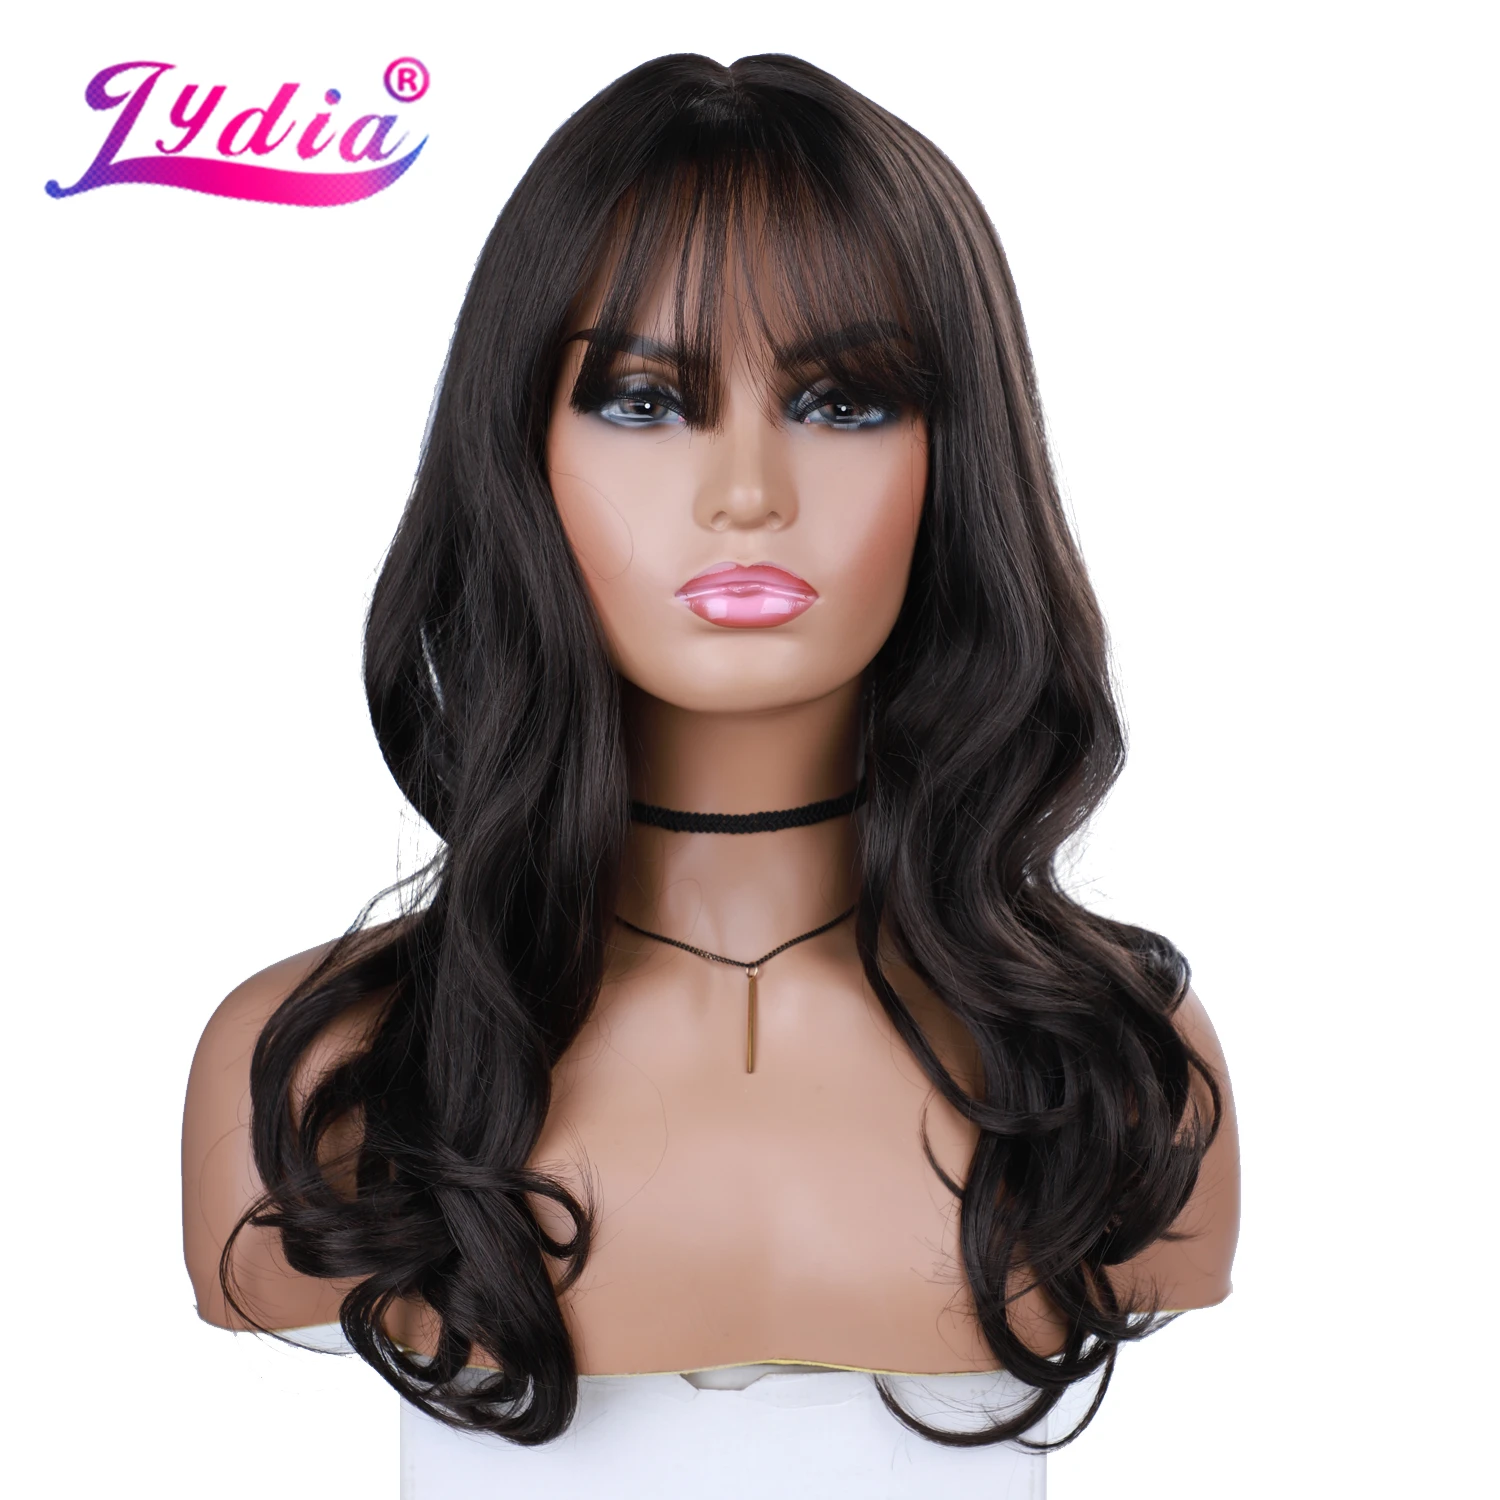 

Lydia Mixed Long Synthetic Hair Straight Free-Side Bang African American Women Tail Curly Wavy 18Inch Kanekalon Daily Wig Blonde